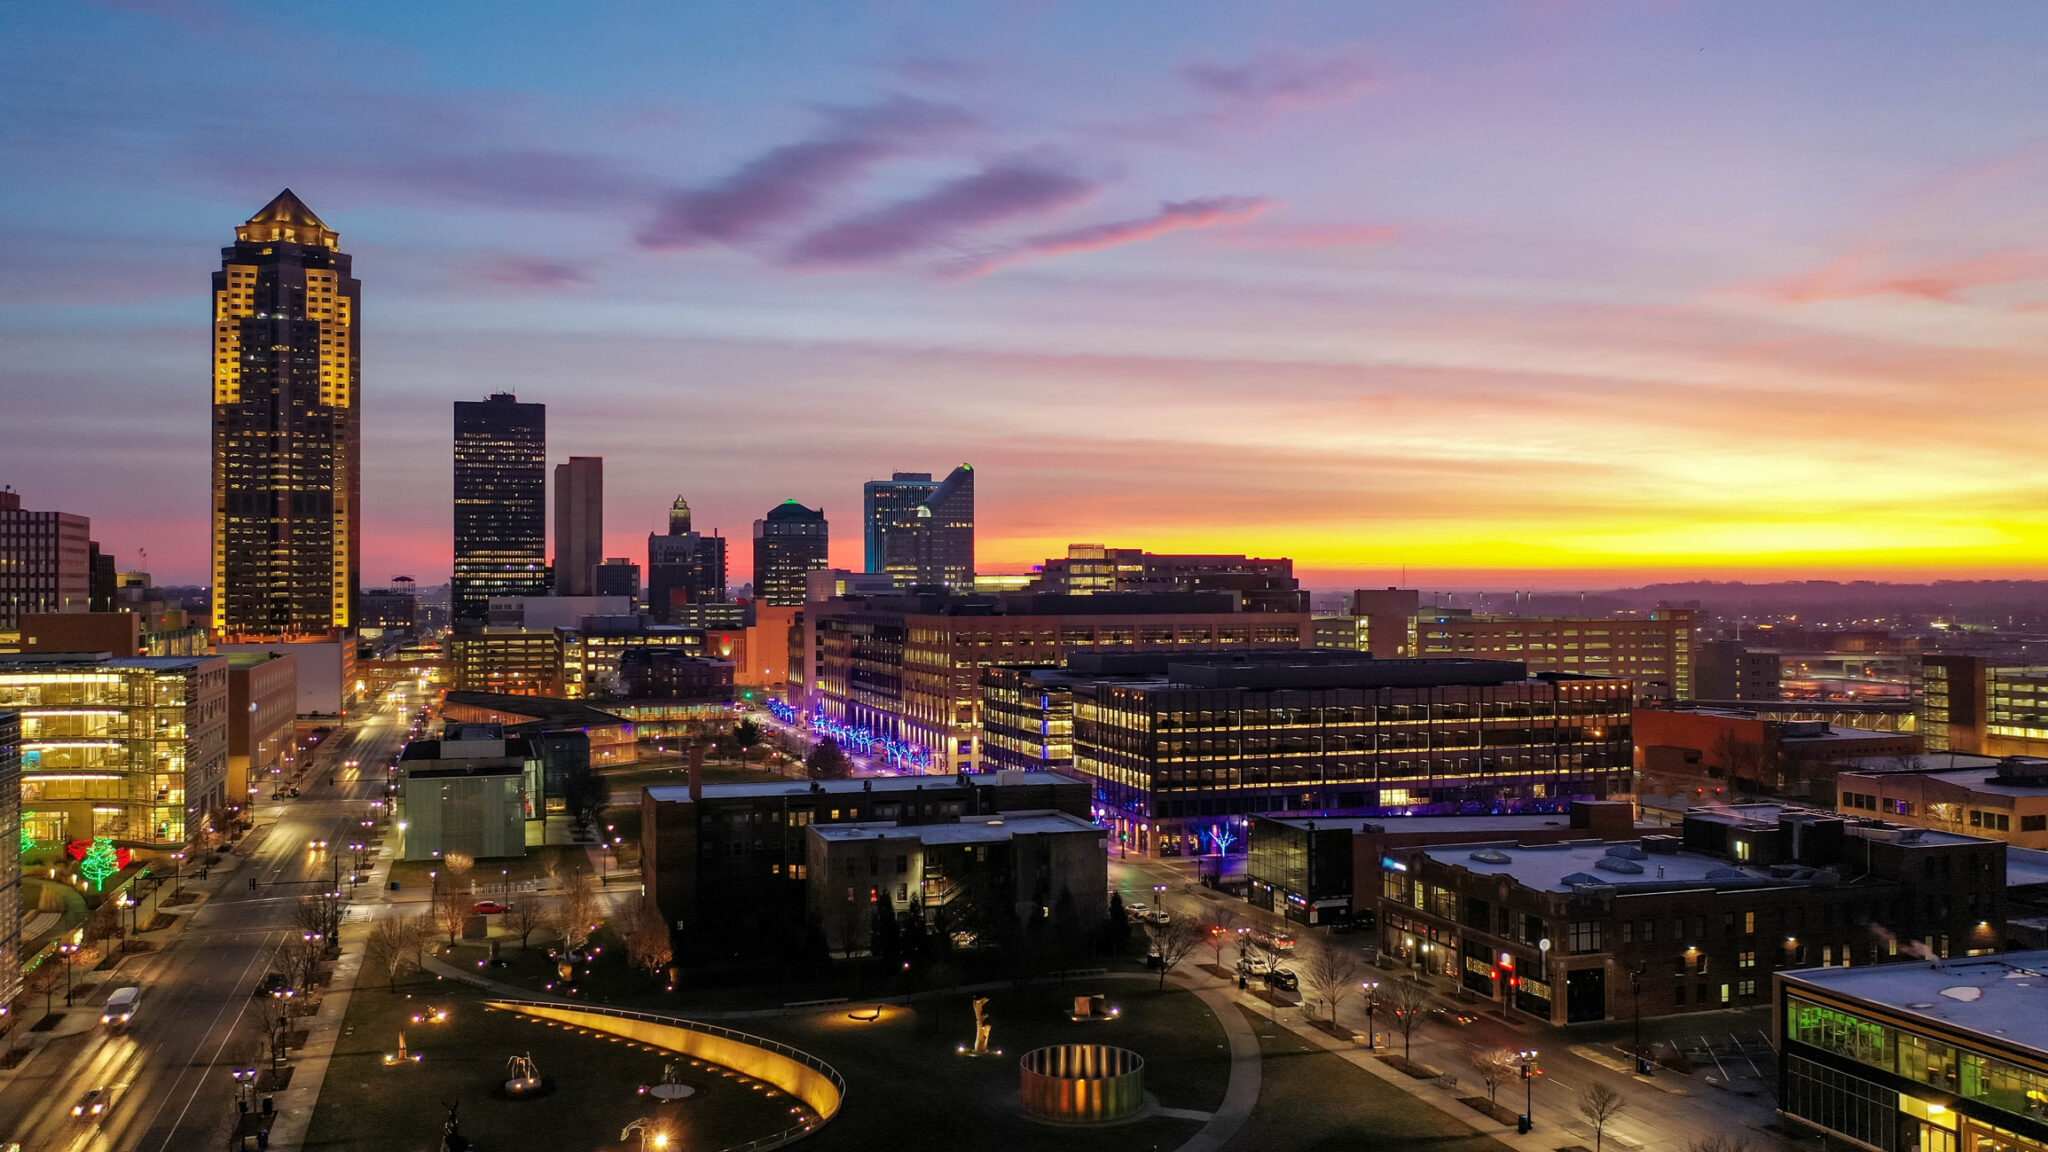 Aerial view of the Des Moines skyline at sunrise looking out across the Pap...